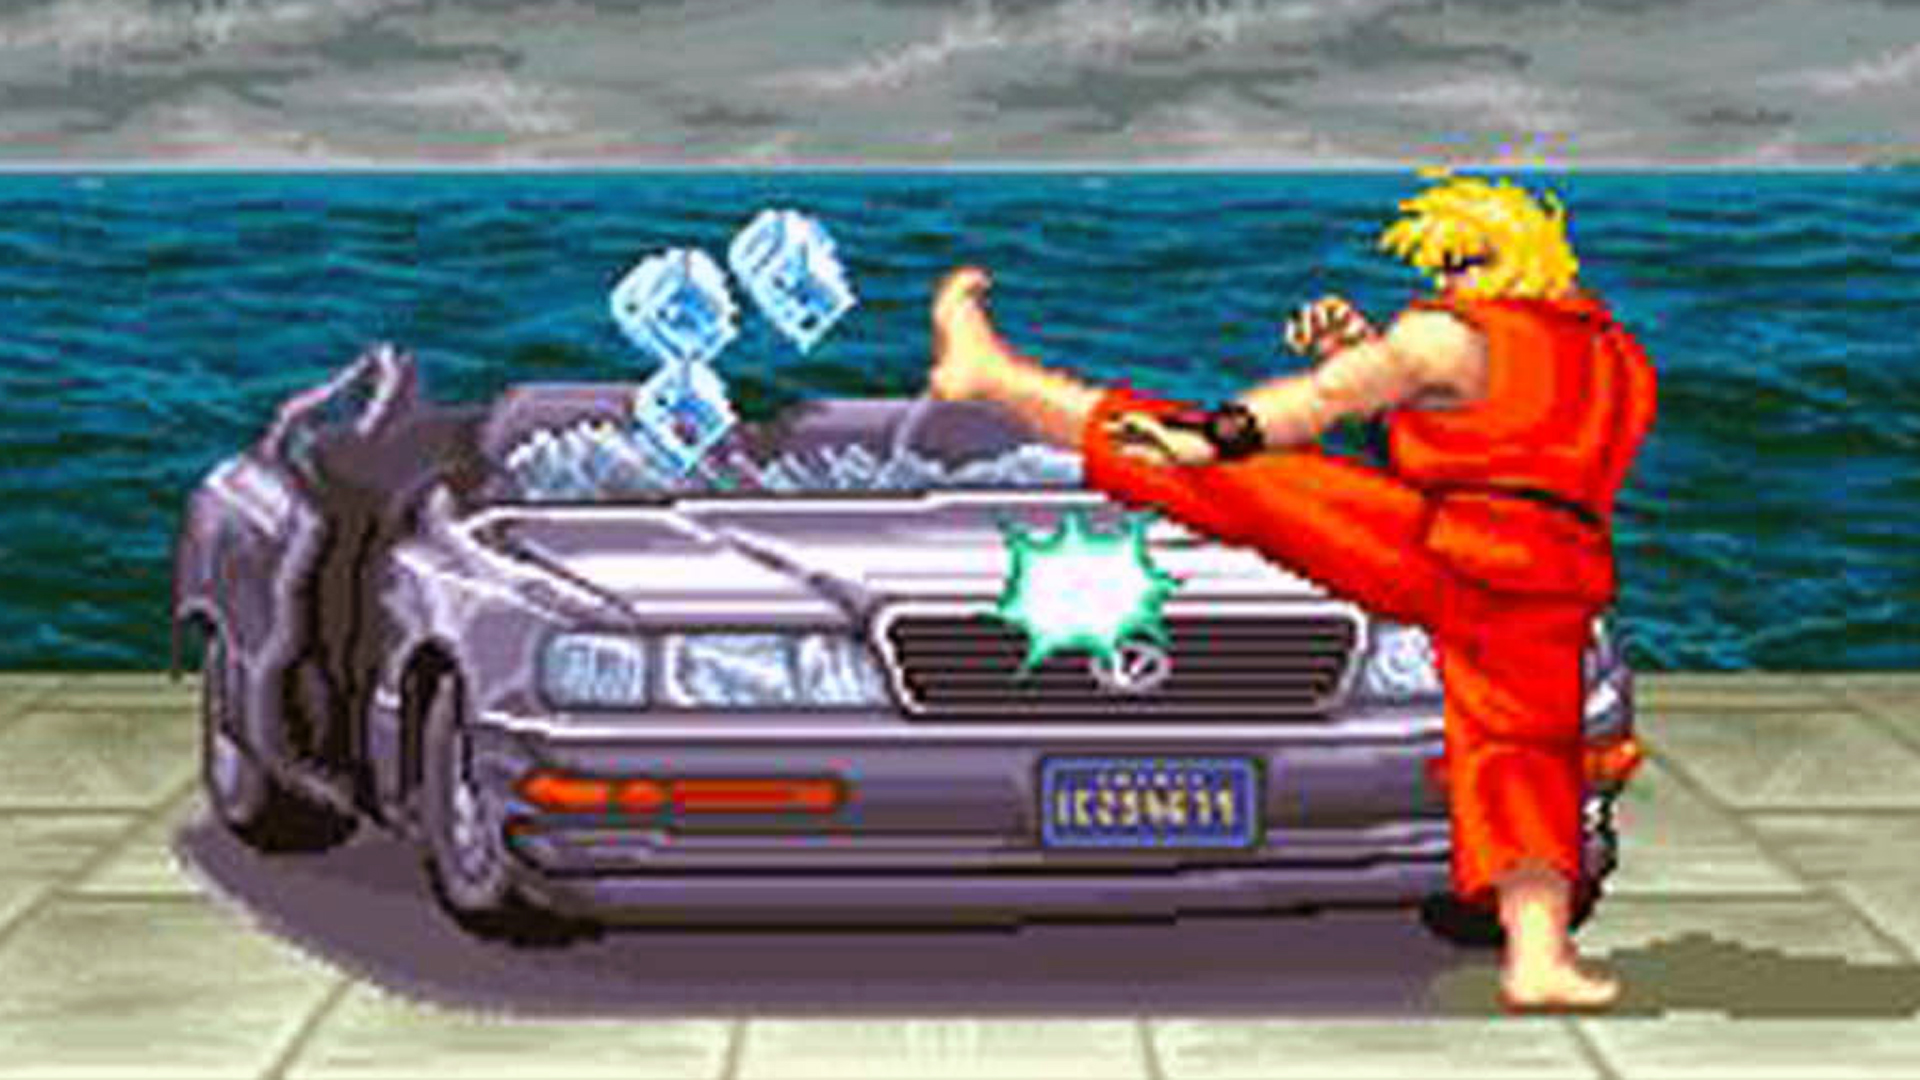 Capcom Arcade Stadium's games can be bought separately, but there's nothing new